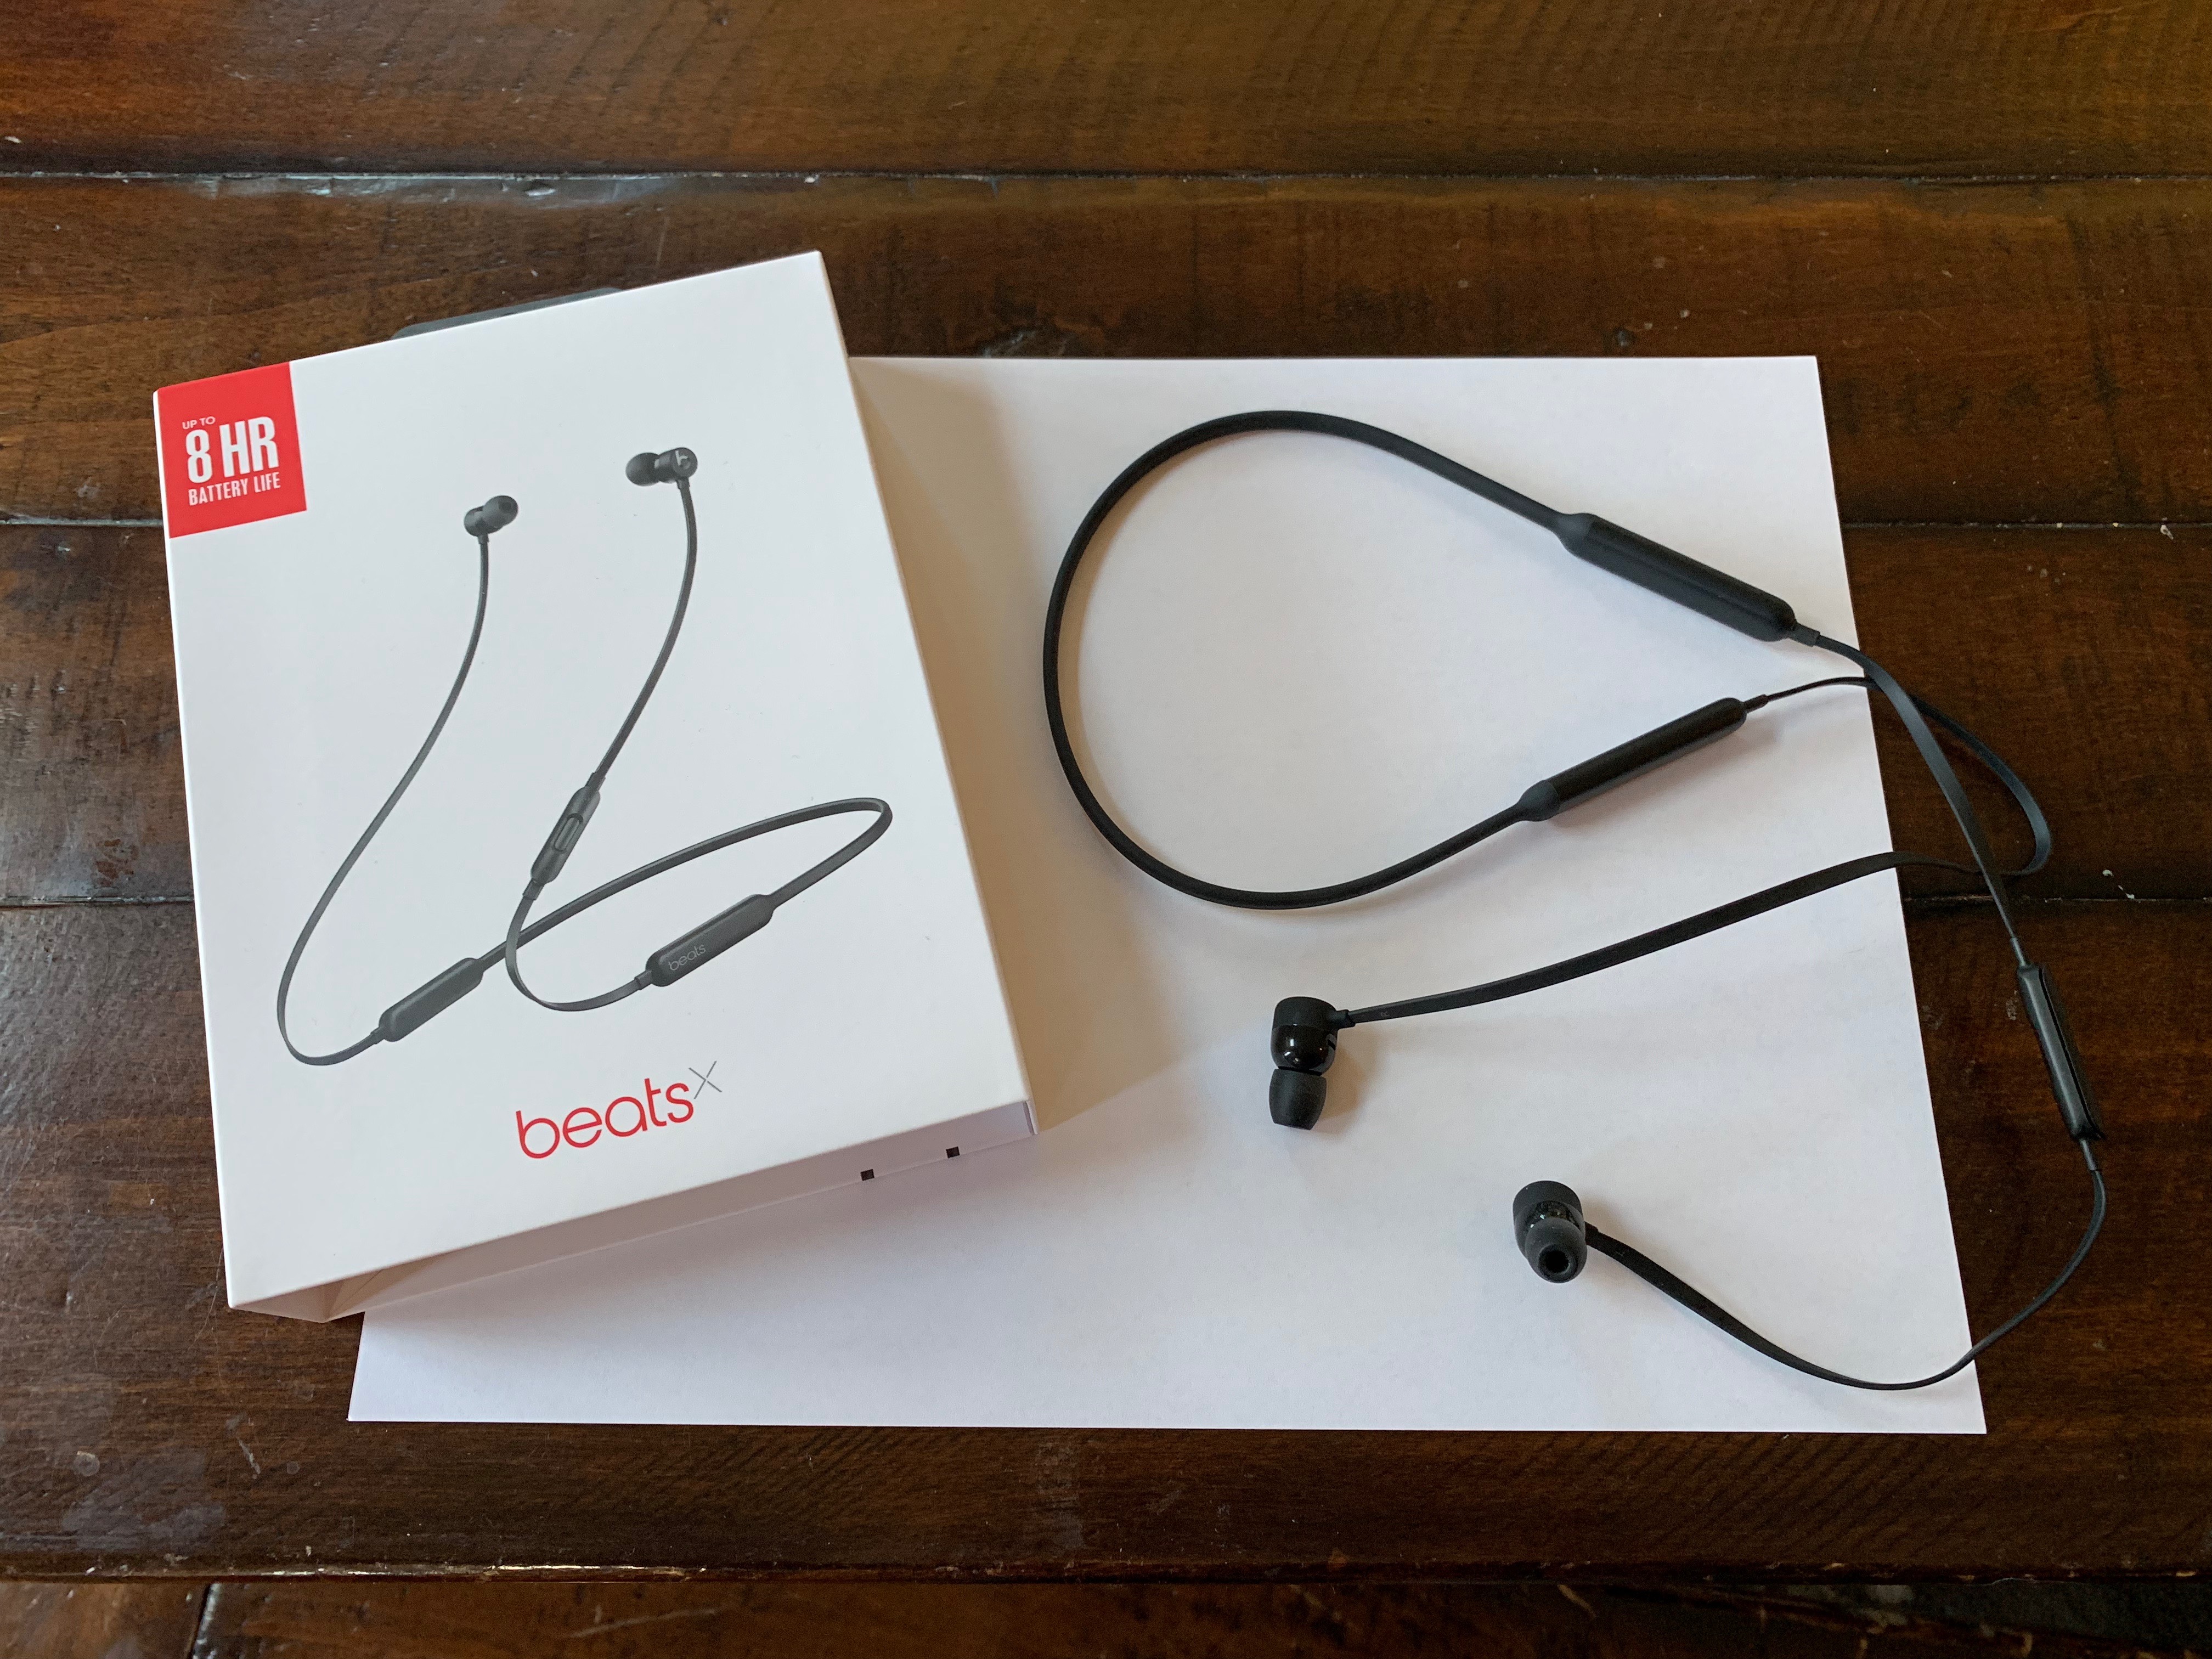 Are BeatsX Earbuds Worth It? - Pizza In 